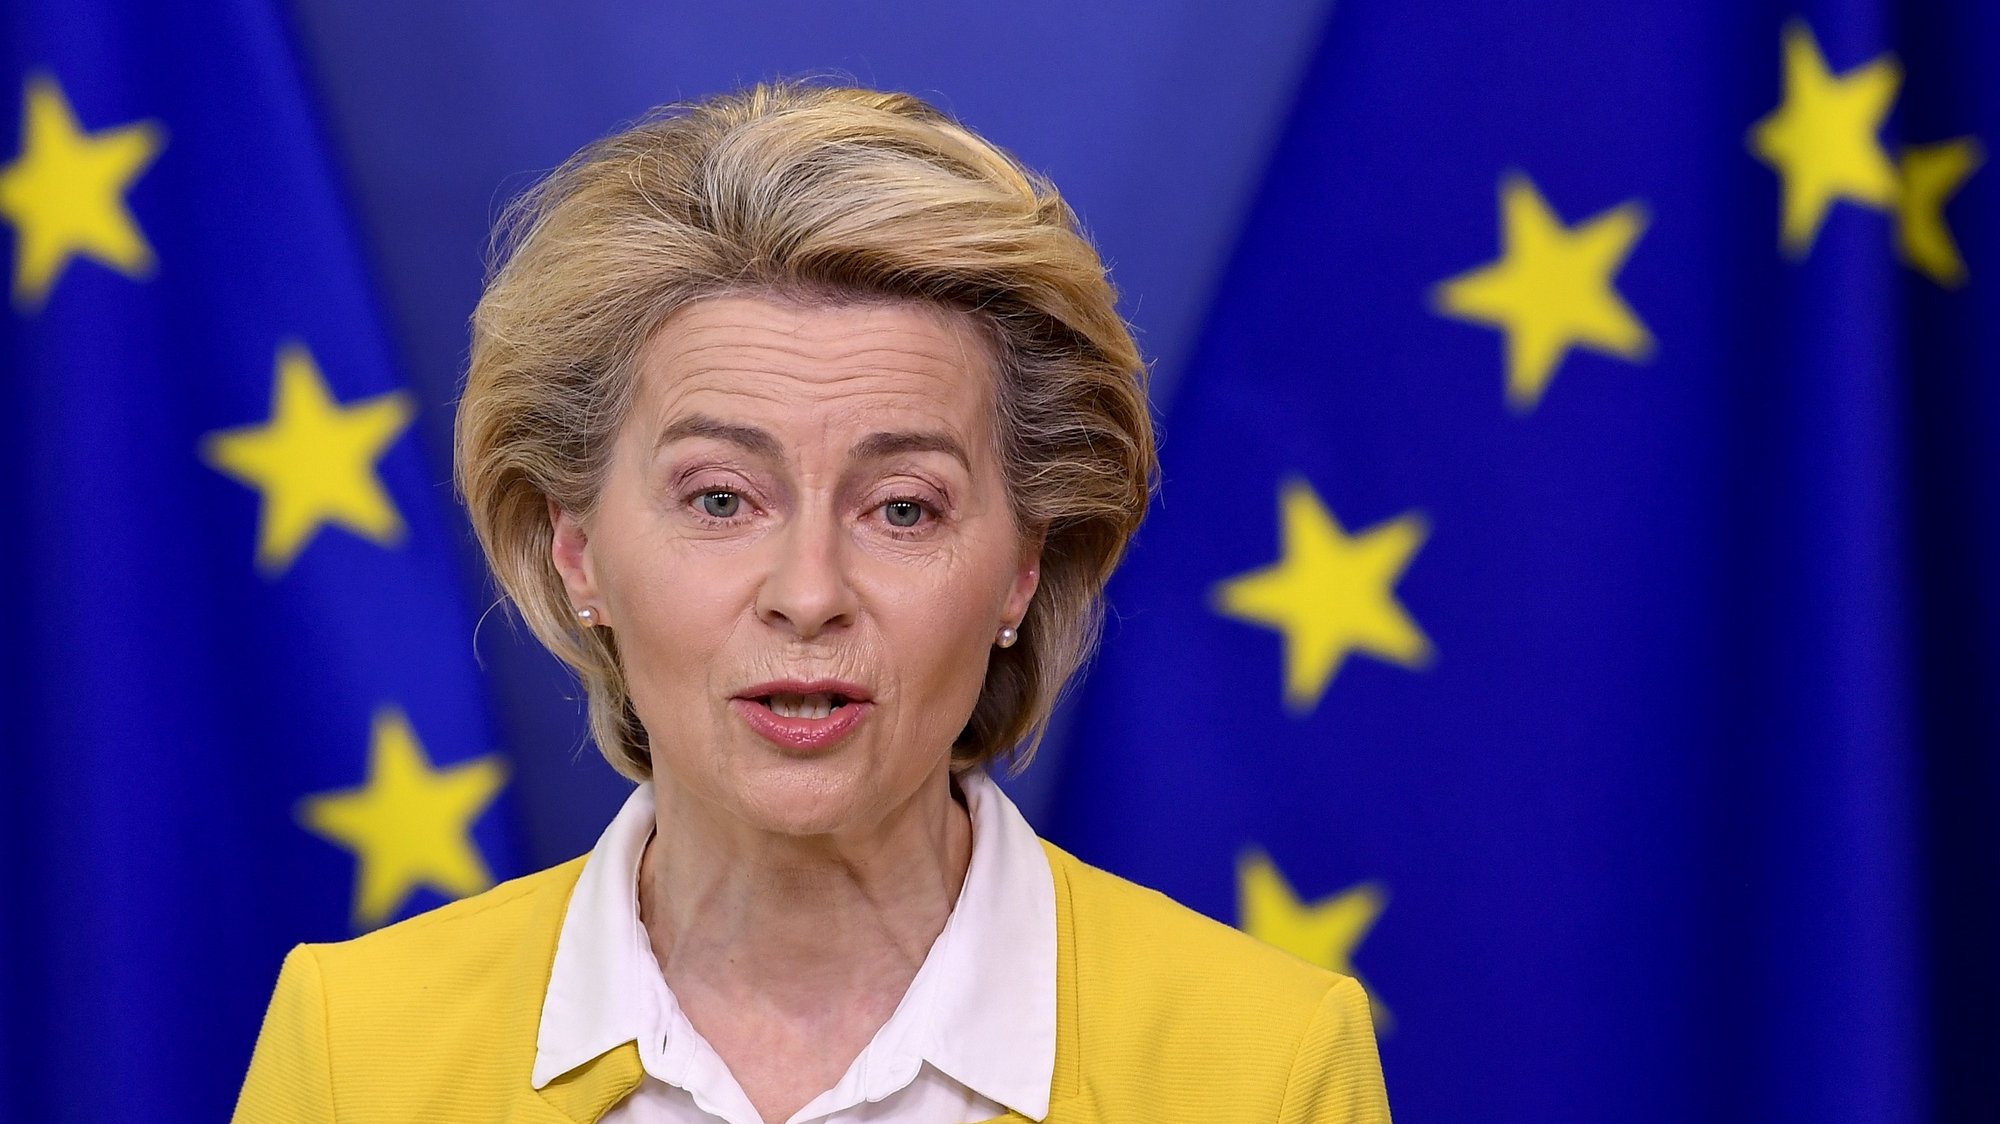 epa09134955 European Commission President Ursula von der Leyen delivers a statement after a college meeting at the EU headquarters in Brussels, Belgium, 14 April 2021.  EPA/JOHN THYS / POOL